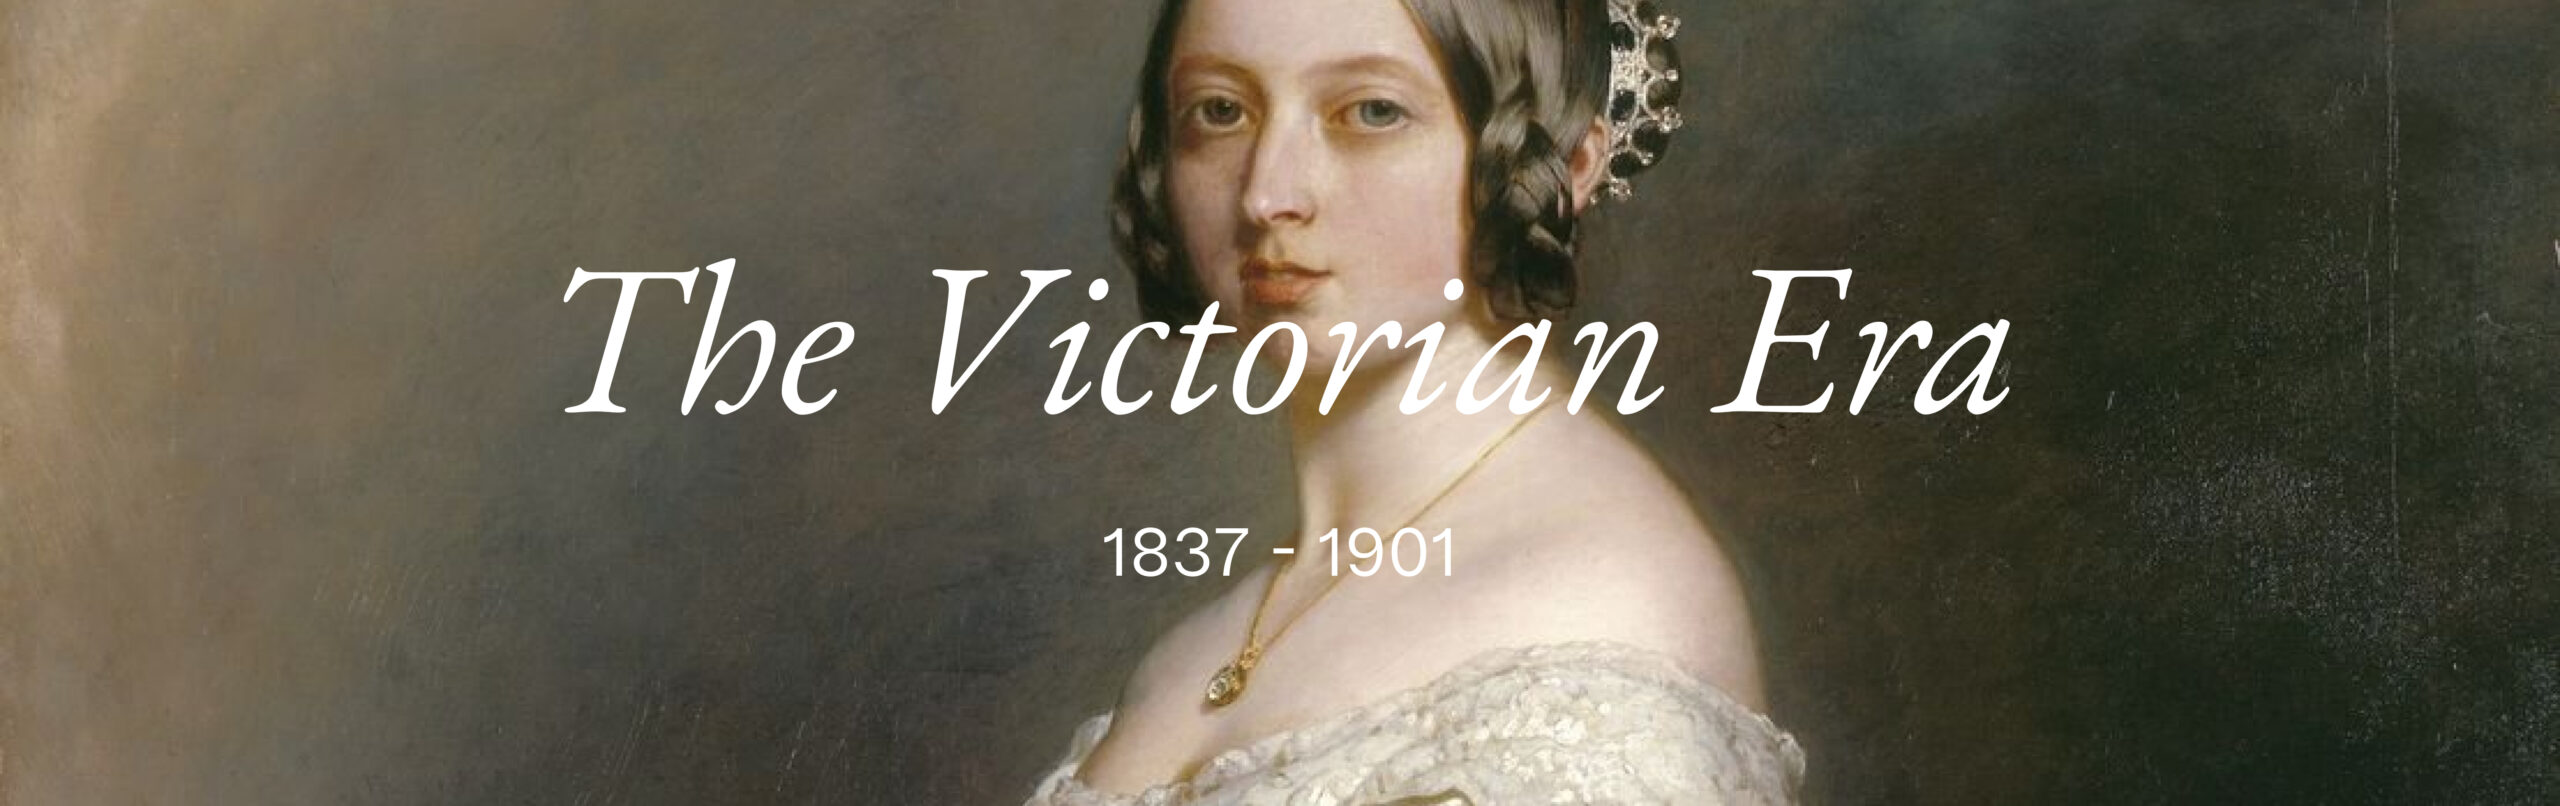 cropped photo of an Oil painting of Queen Victoria. White text set on top of photo that reads "The Victorian Era" followed by "1837 - 1901"